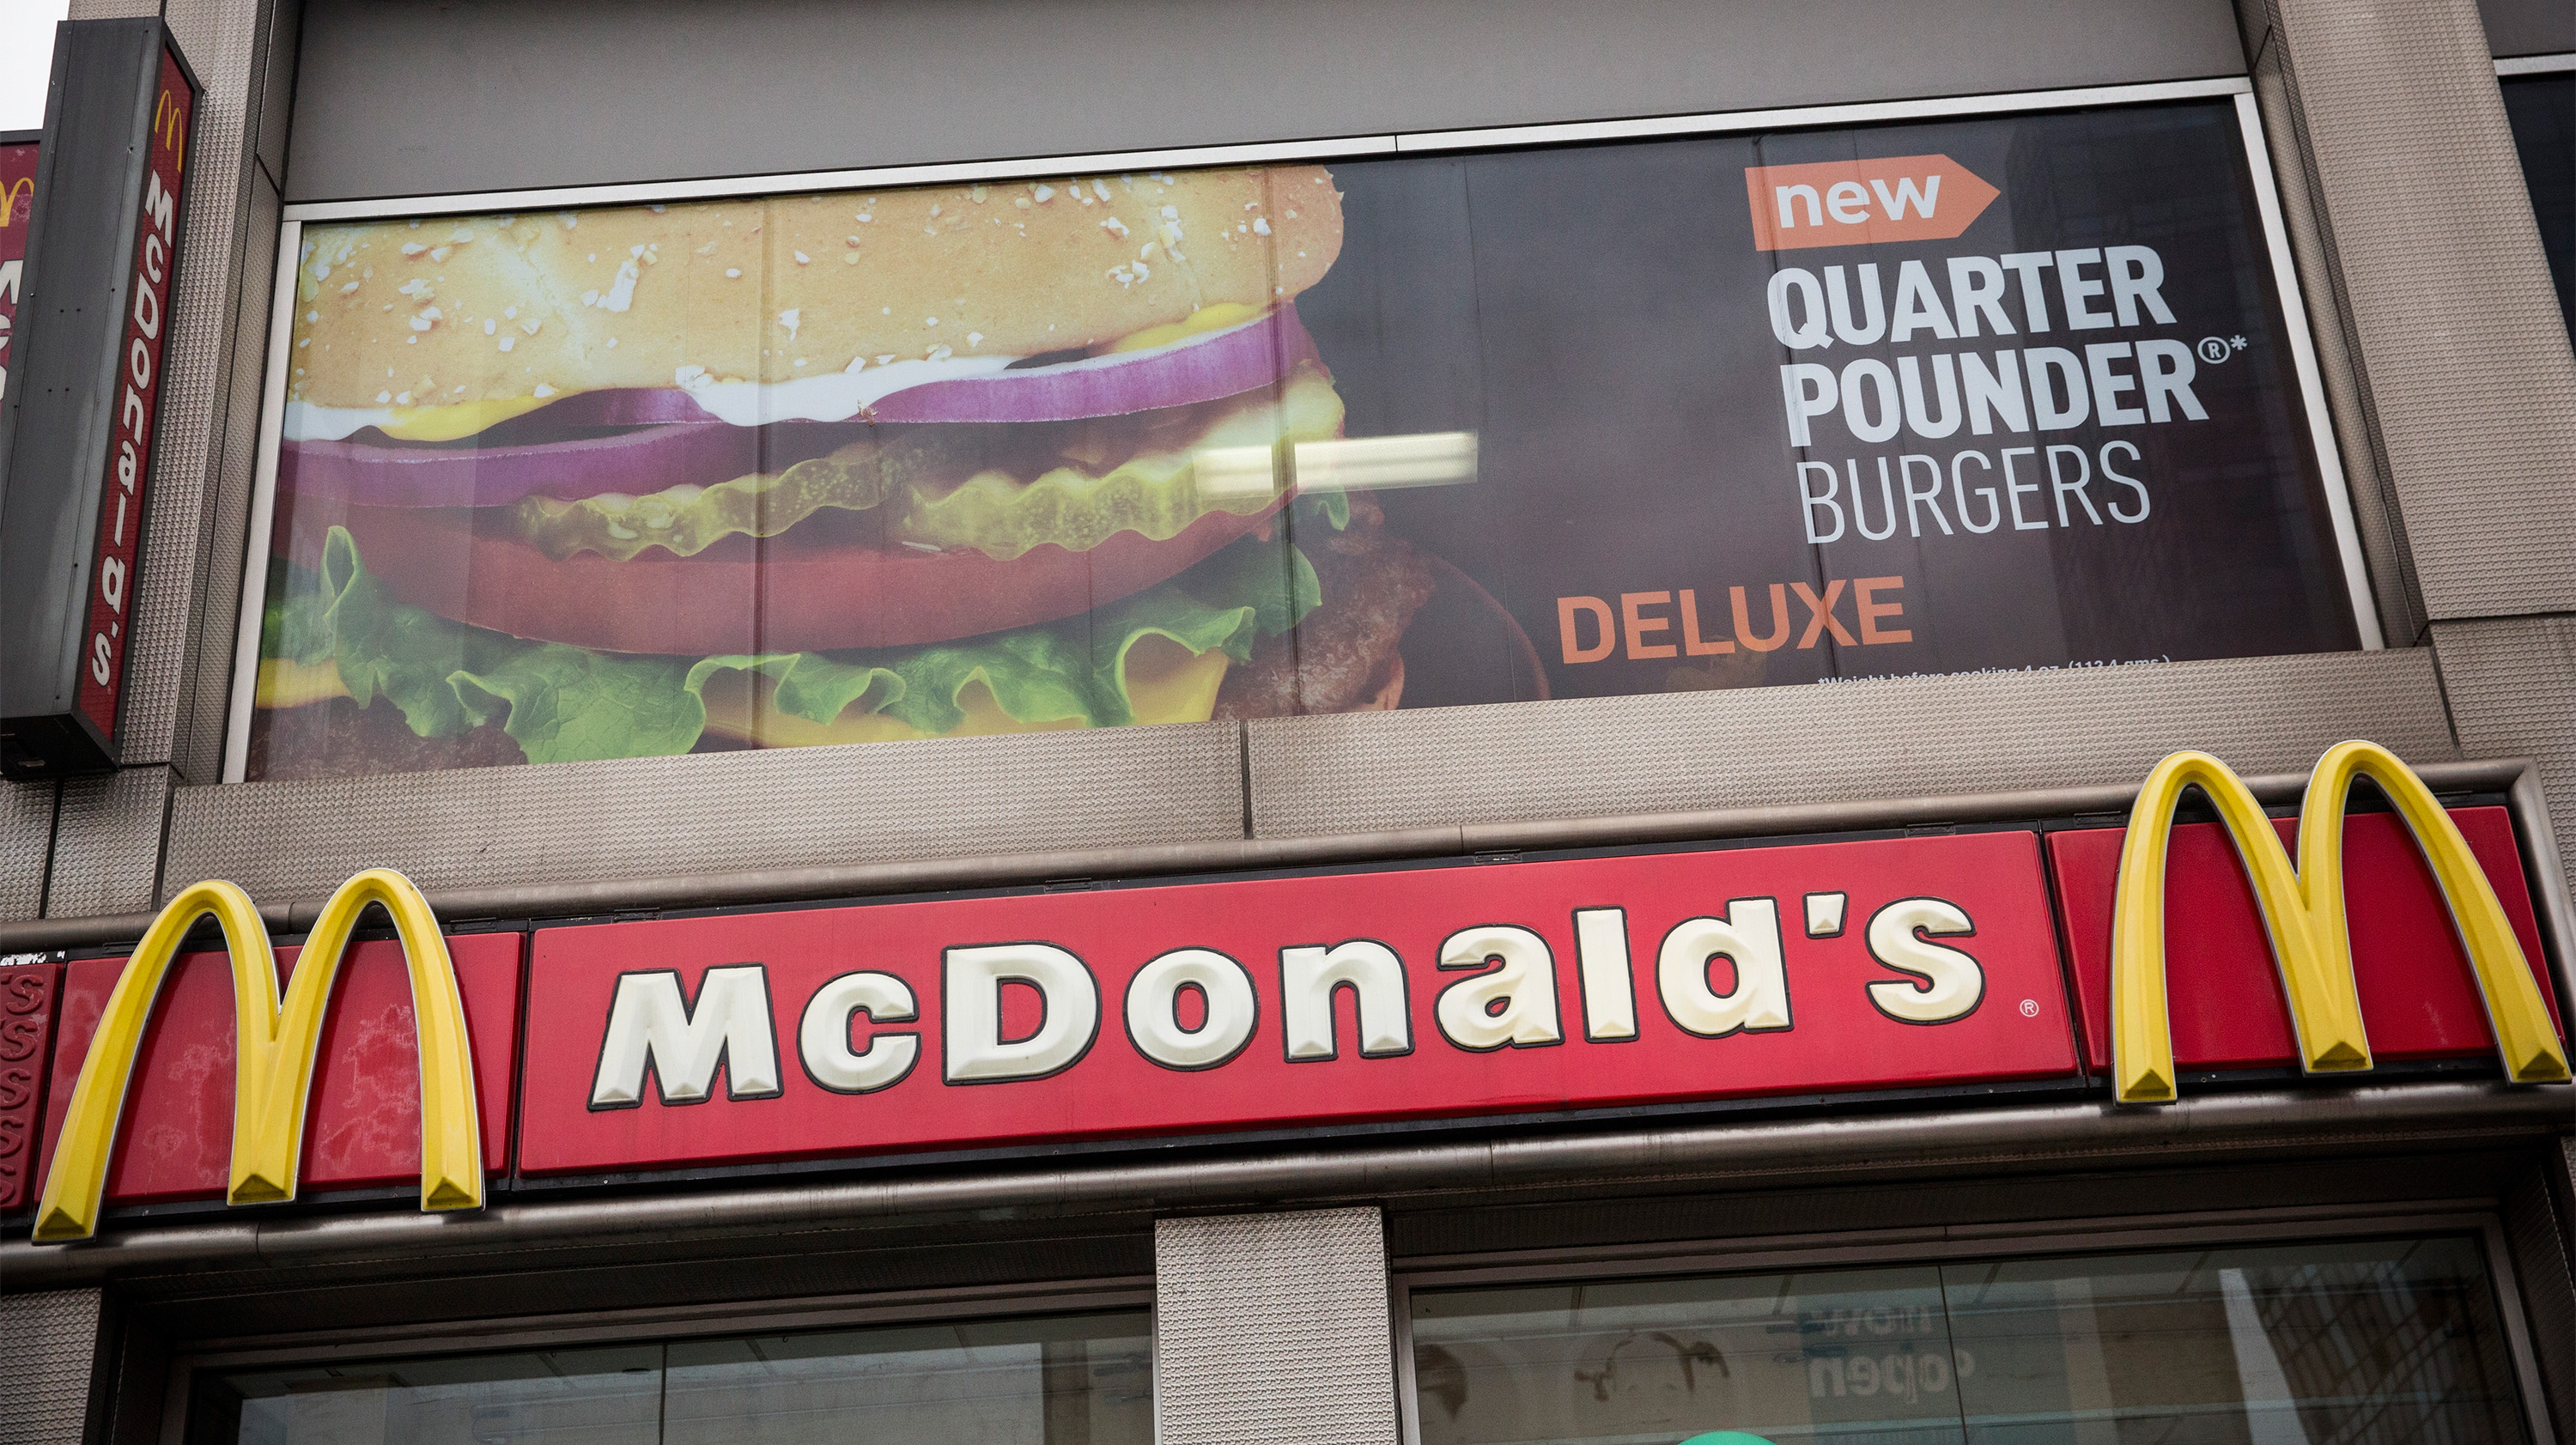 A McDonald's is seen on June 9, 2014 in New York City. (Andrew Burton&mdash;Getty Images)